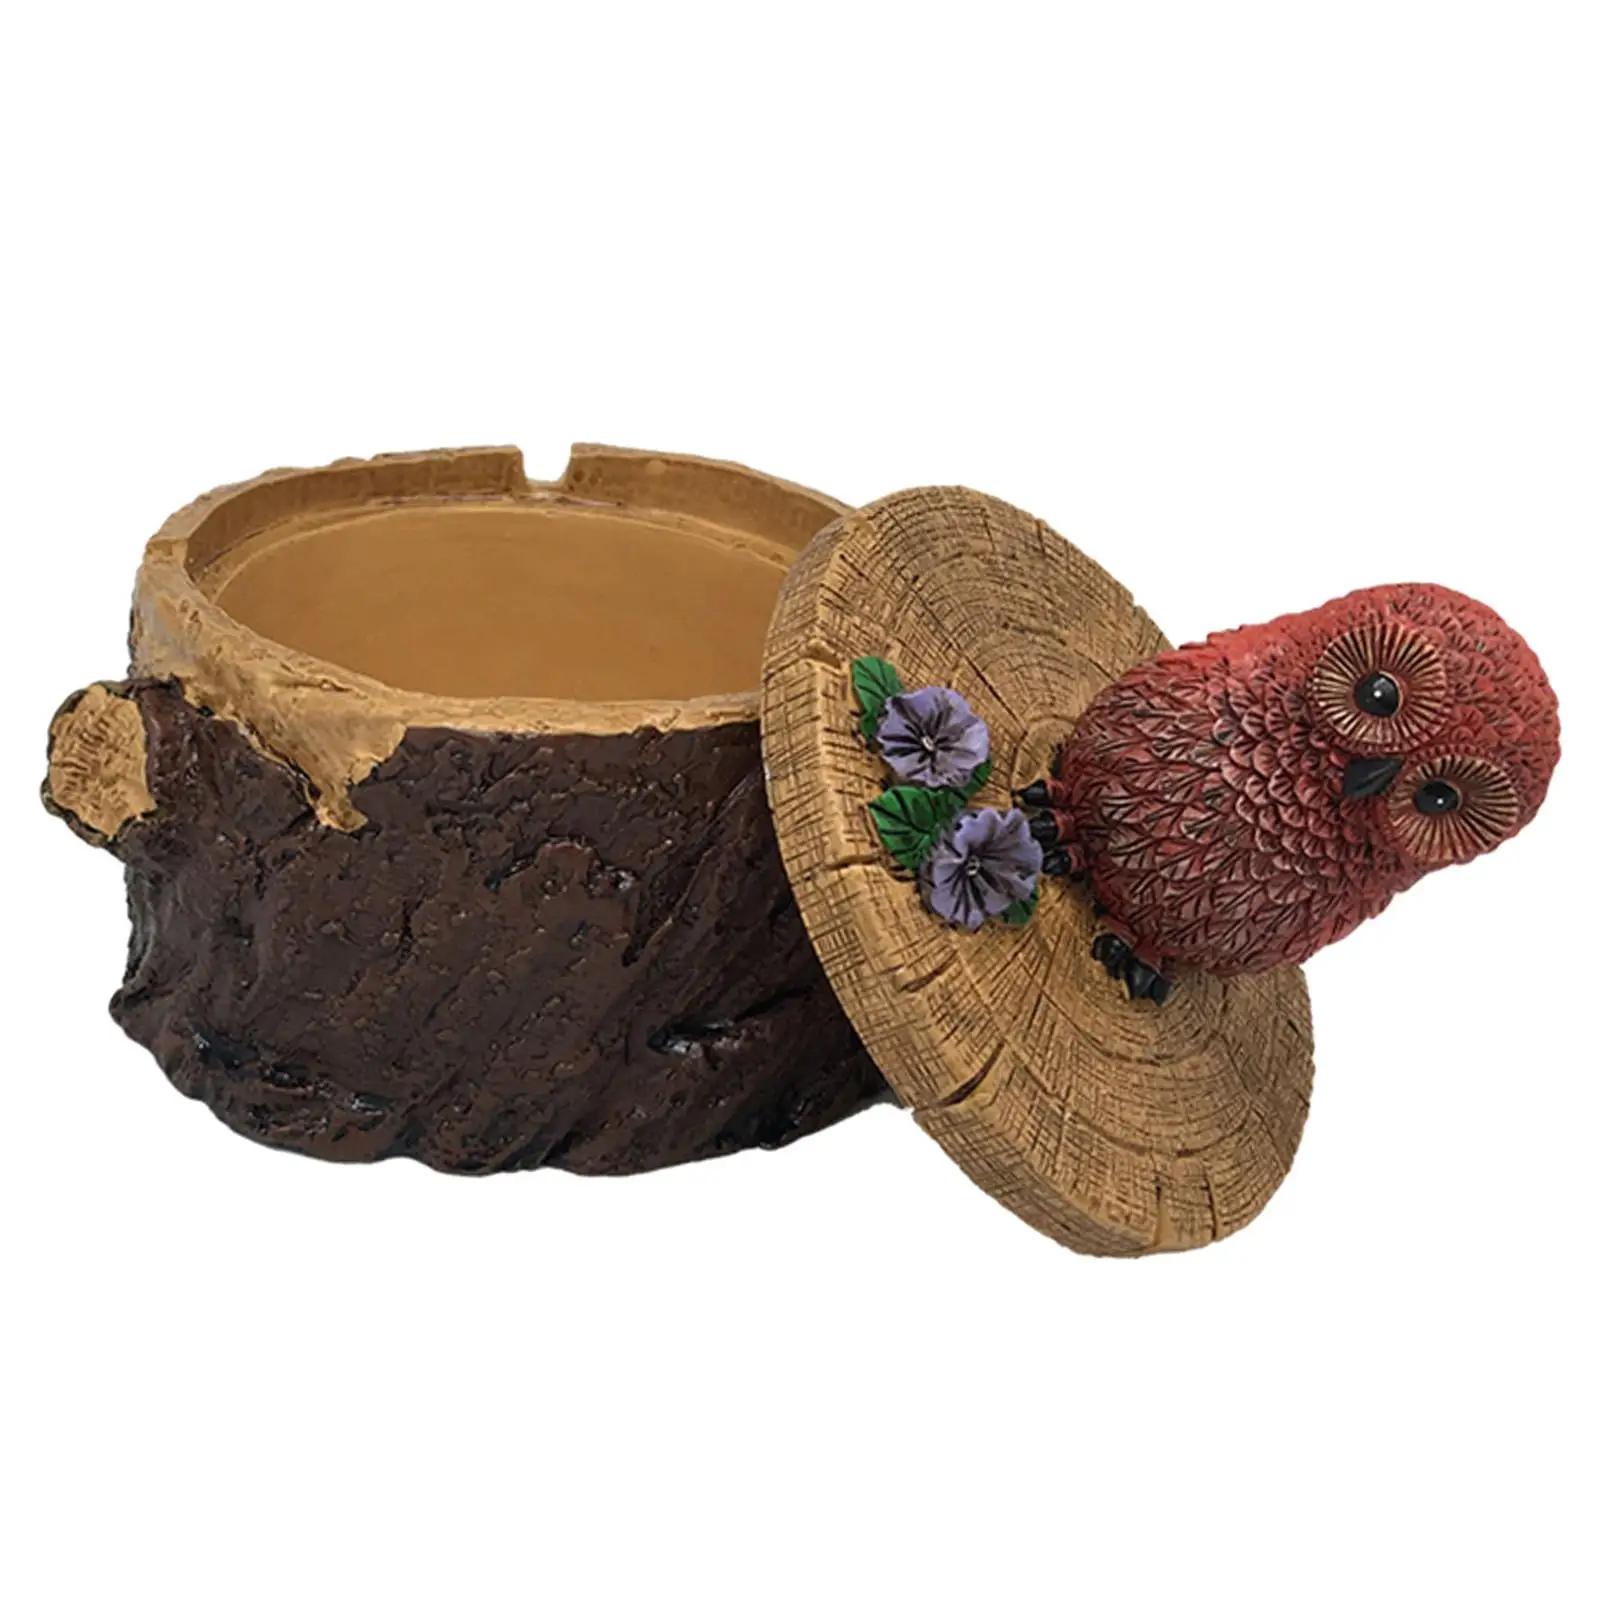 Animal Ashtray Decorative with Lid Accessories Gift Stable Retro Creative Novelty Organizer for Household Garden Desktop Outdoor